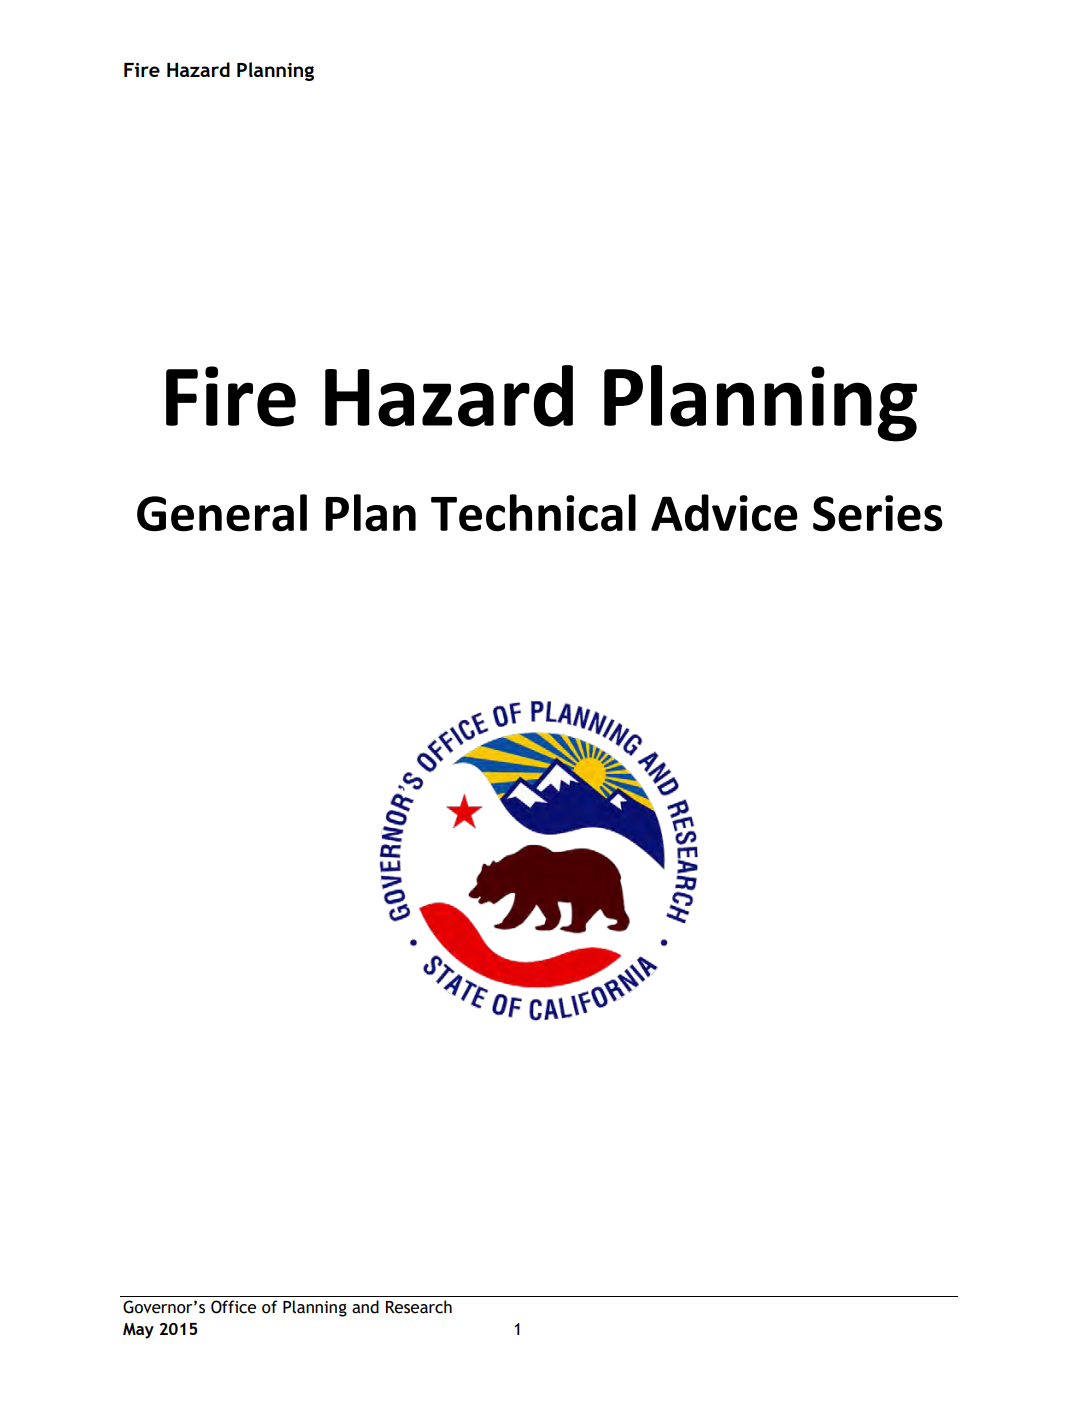 Fire Hazard Planning – General Plan Technical Advice Series Cover